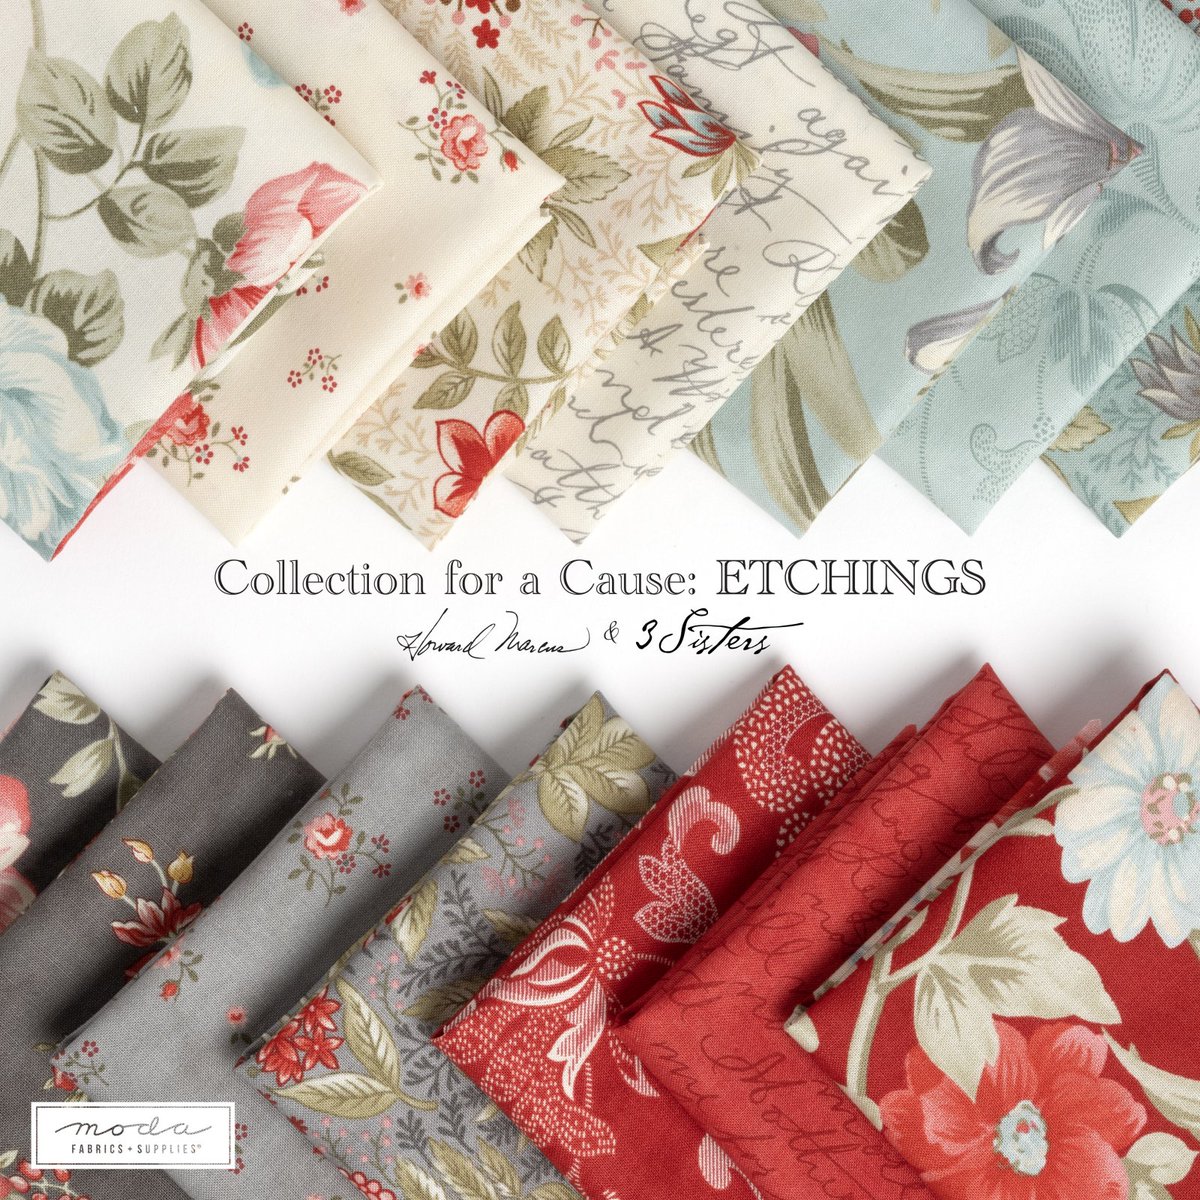 Collections For A Cause - Etchings by Howard Marcus and 3 Sisters for Moda is now in stock.

SHOP> hamelsfabrics.com/shop/Fabrics/V…

#collectionsforacauseetchings #etchingsfabric #howardmarcus #3sistersfabric #modafabric #quilt #sew #canadianquiltshop #BCquiltshop